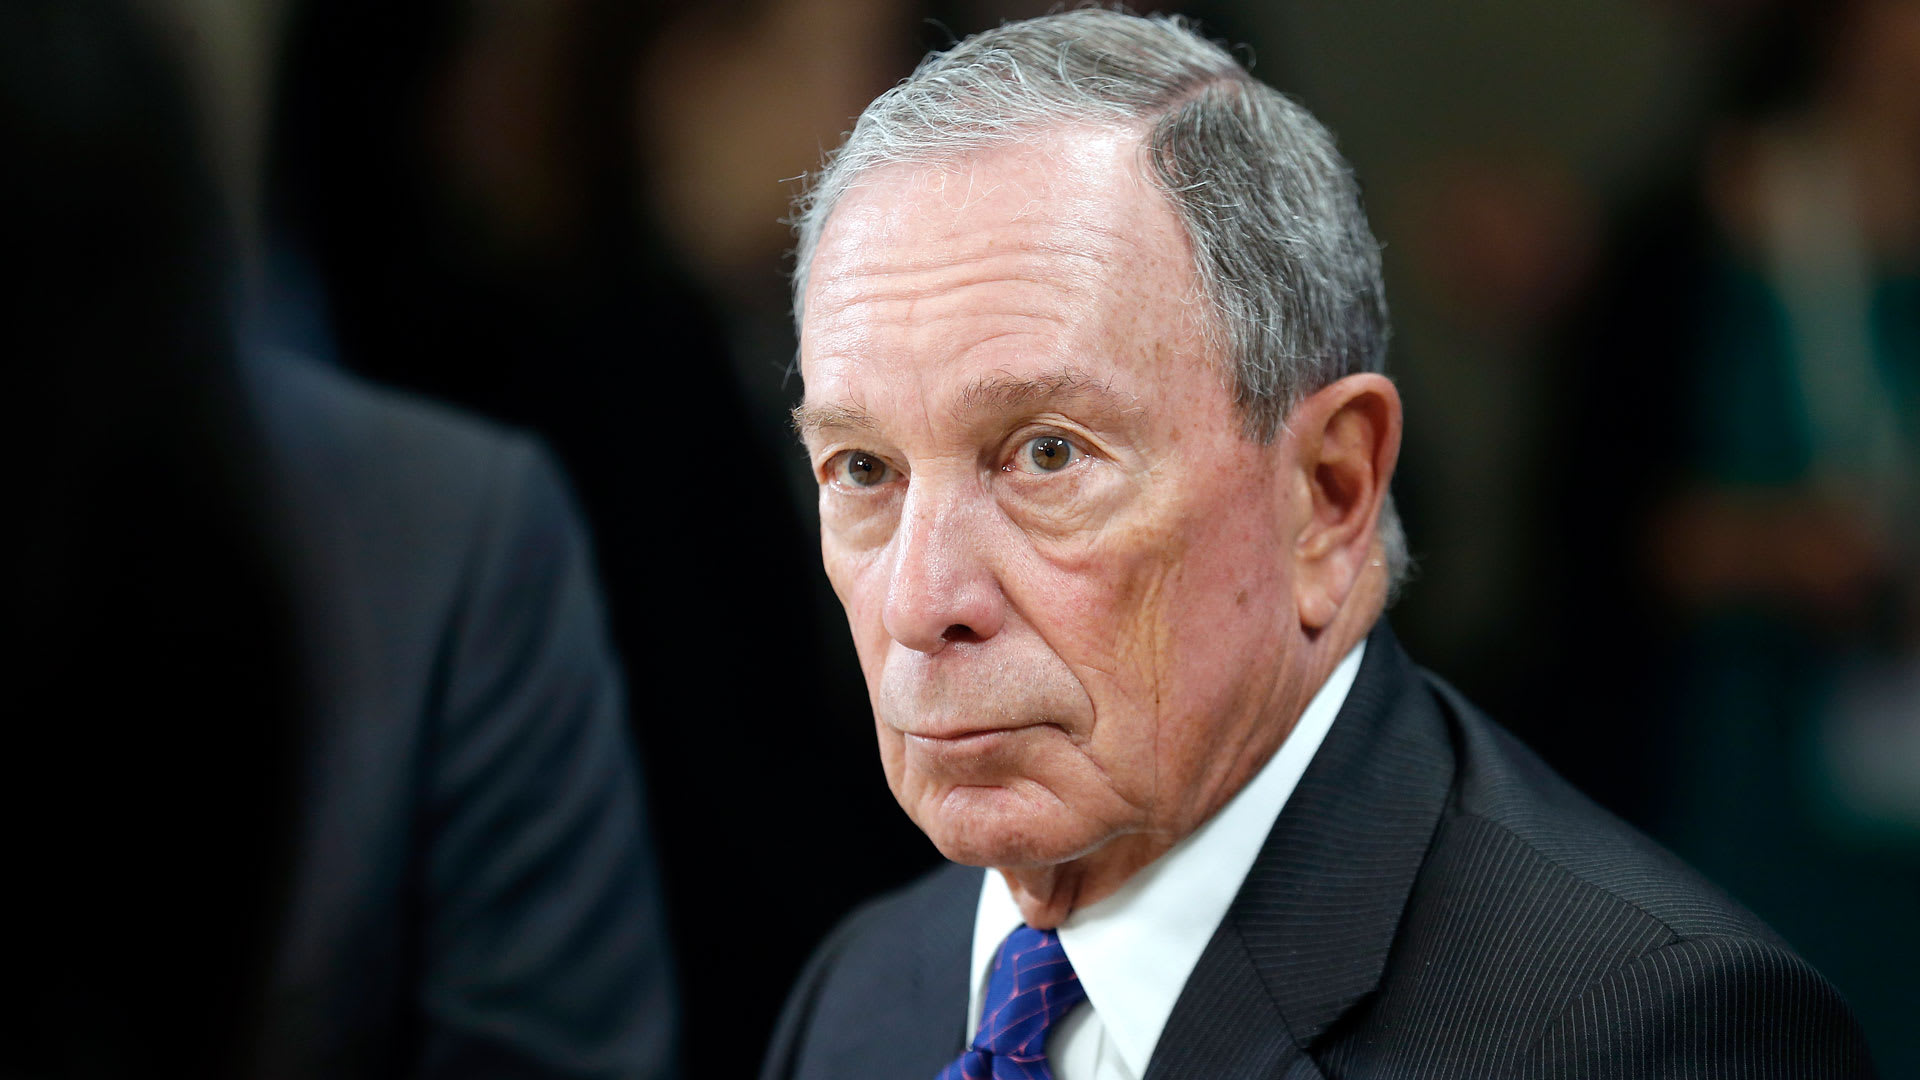 Read Michael Bloomberg’s blistering takedown of the GOP tax plan